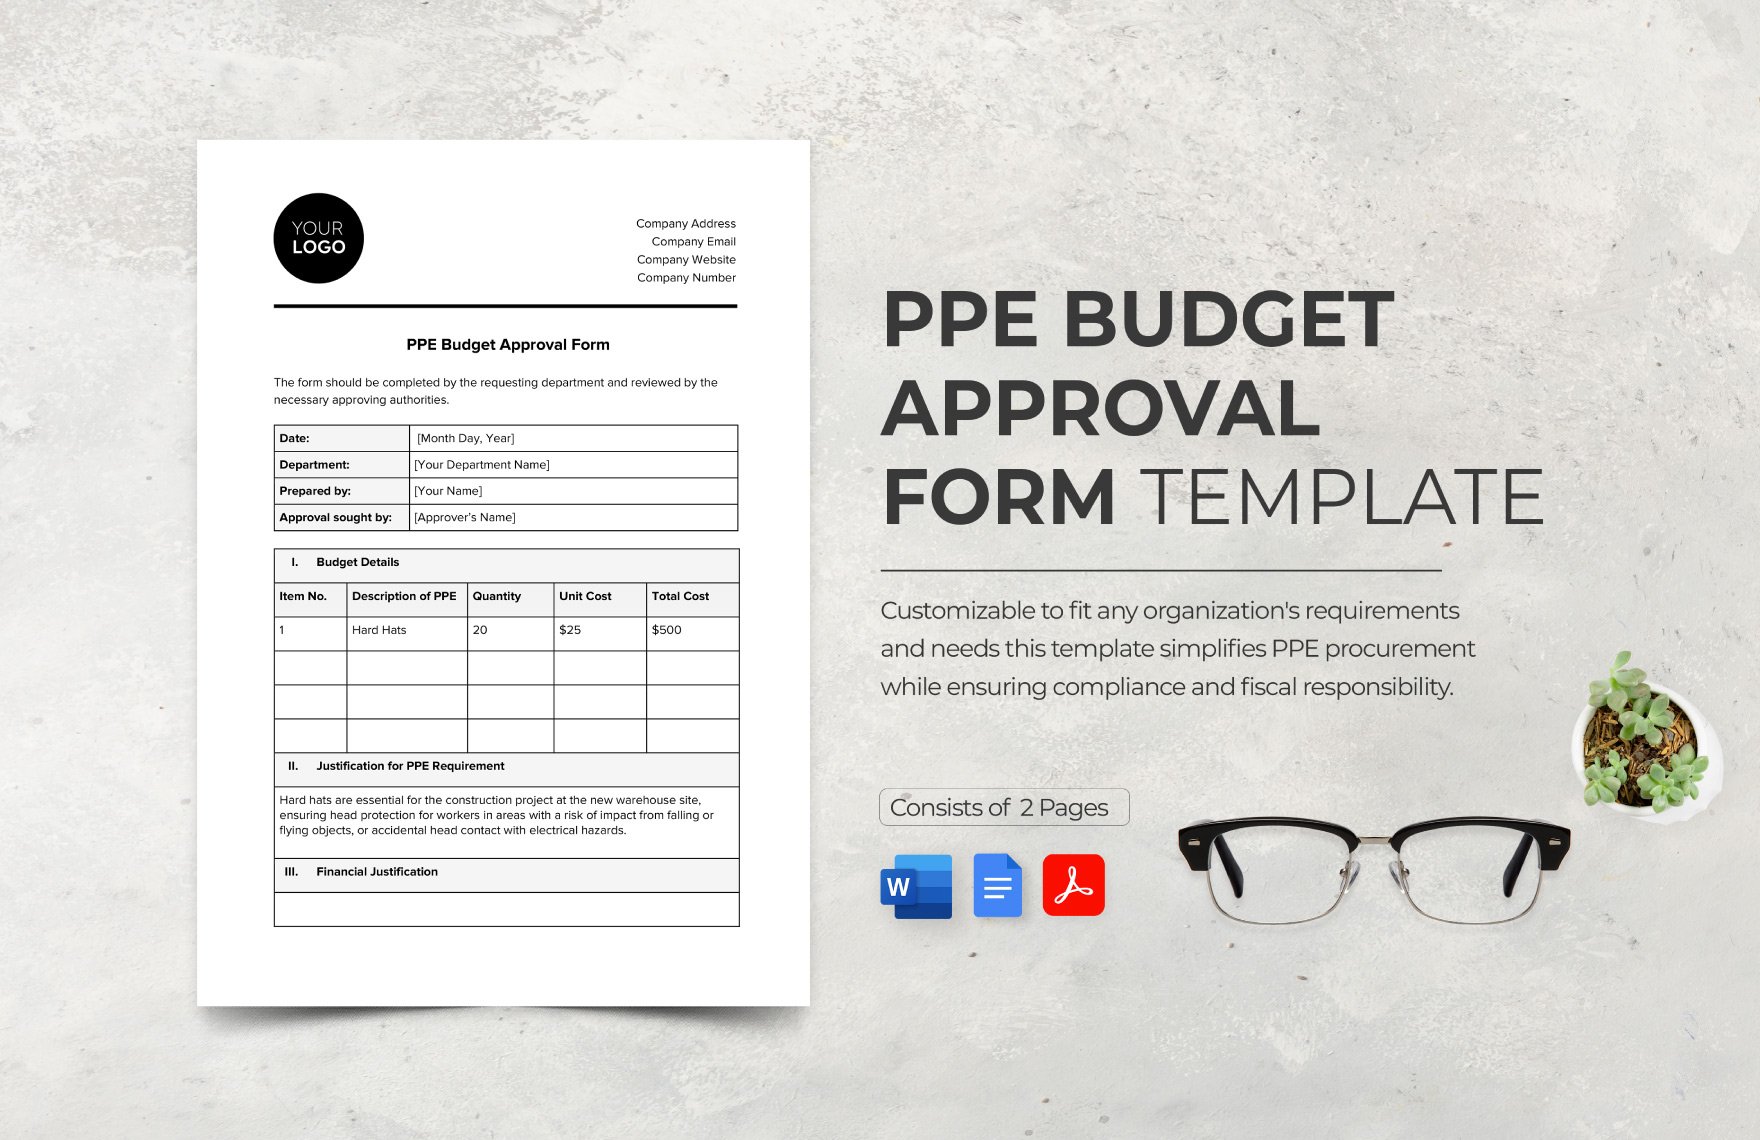 PPE Budget Approval Form Template